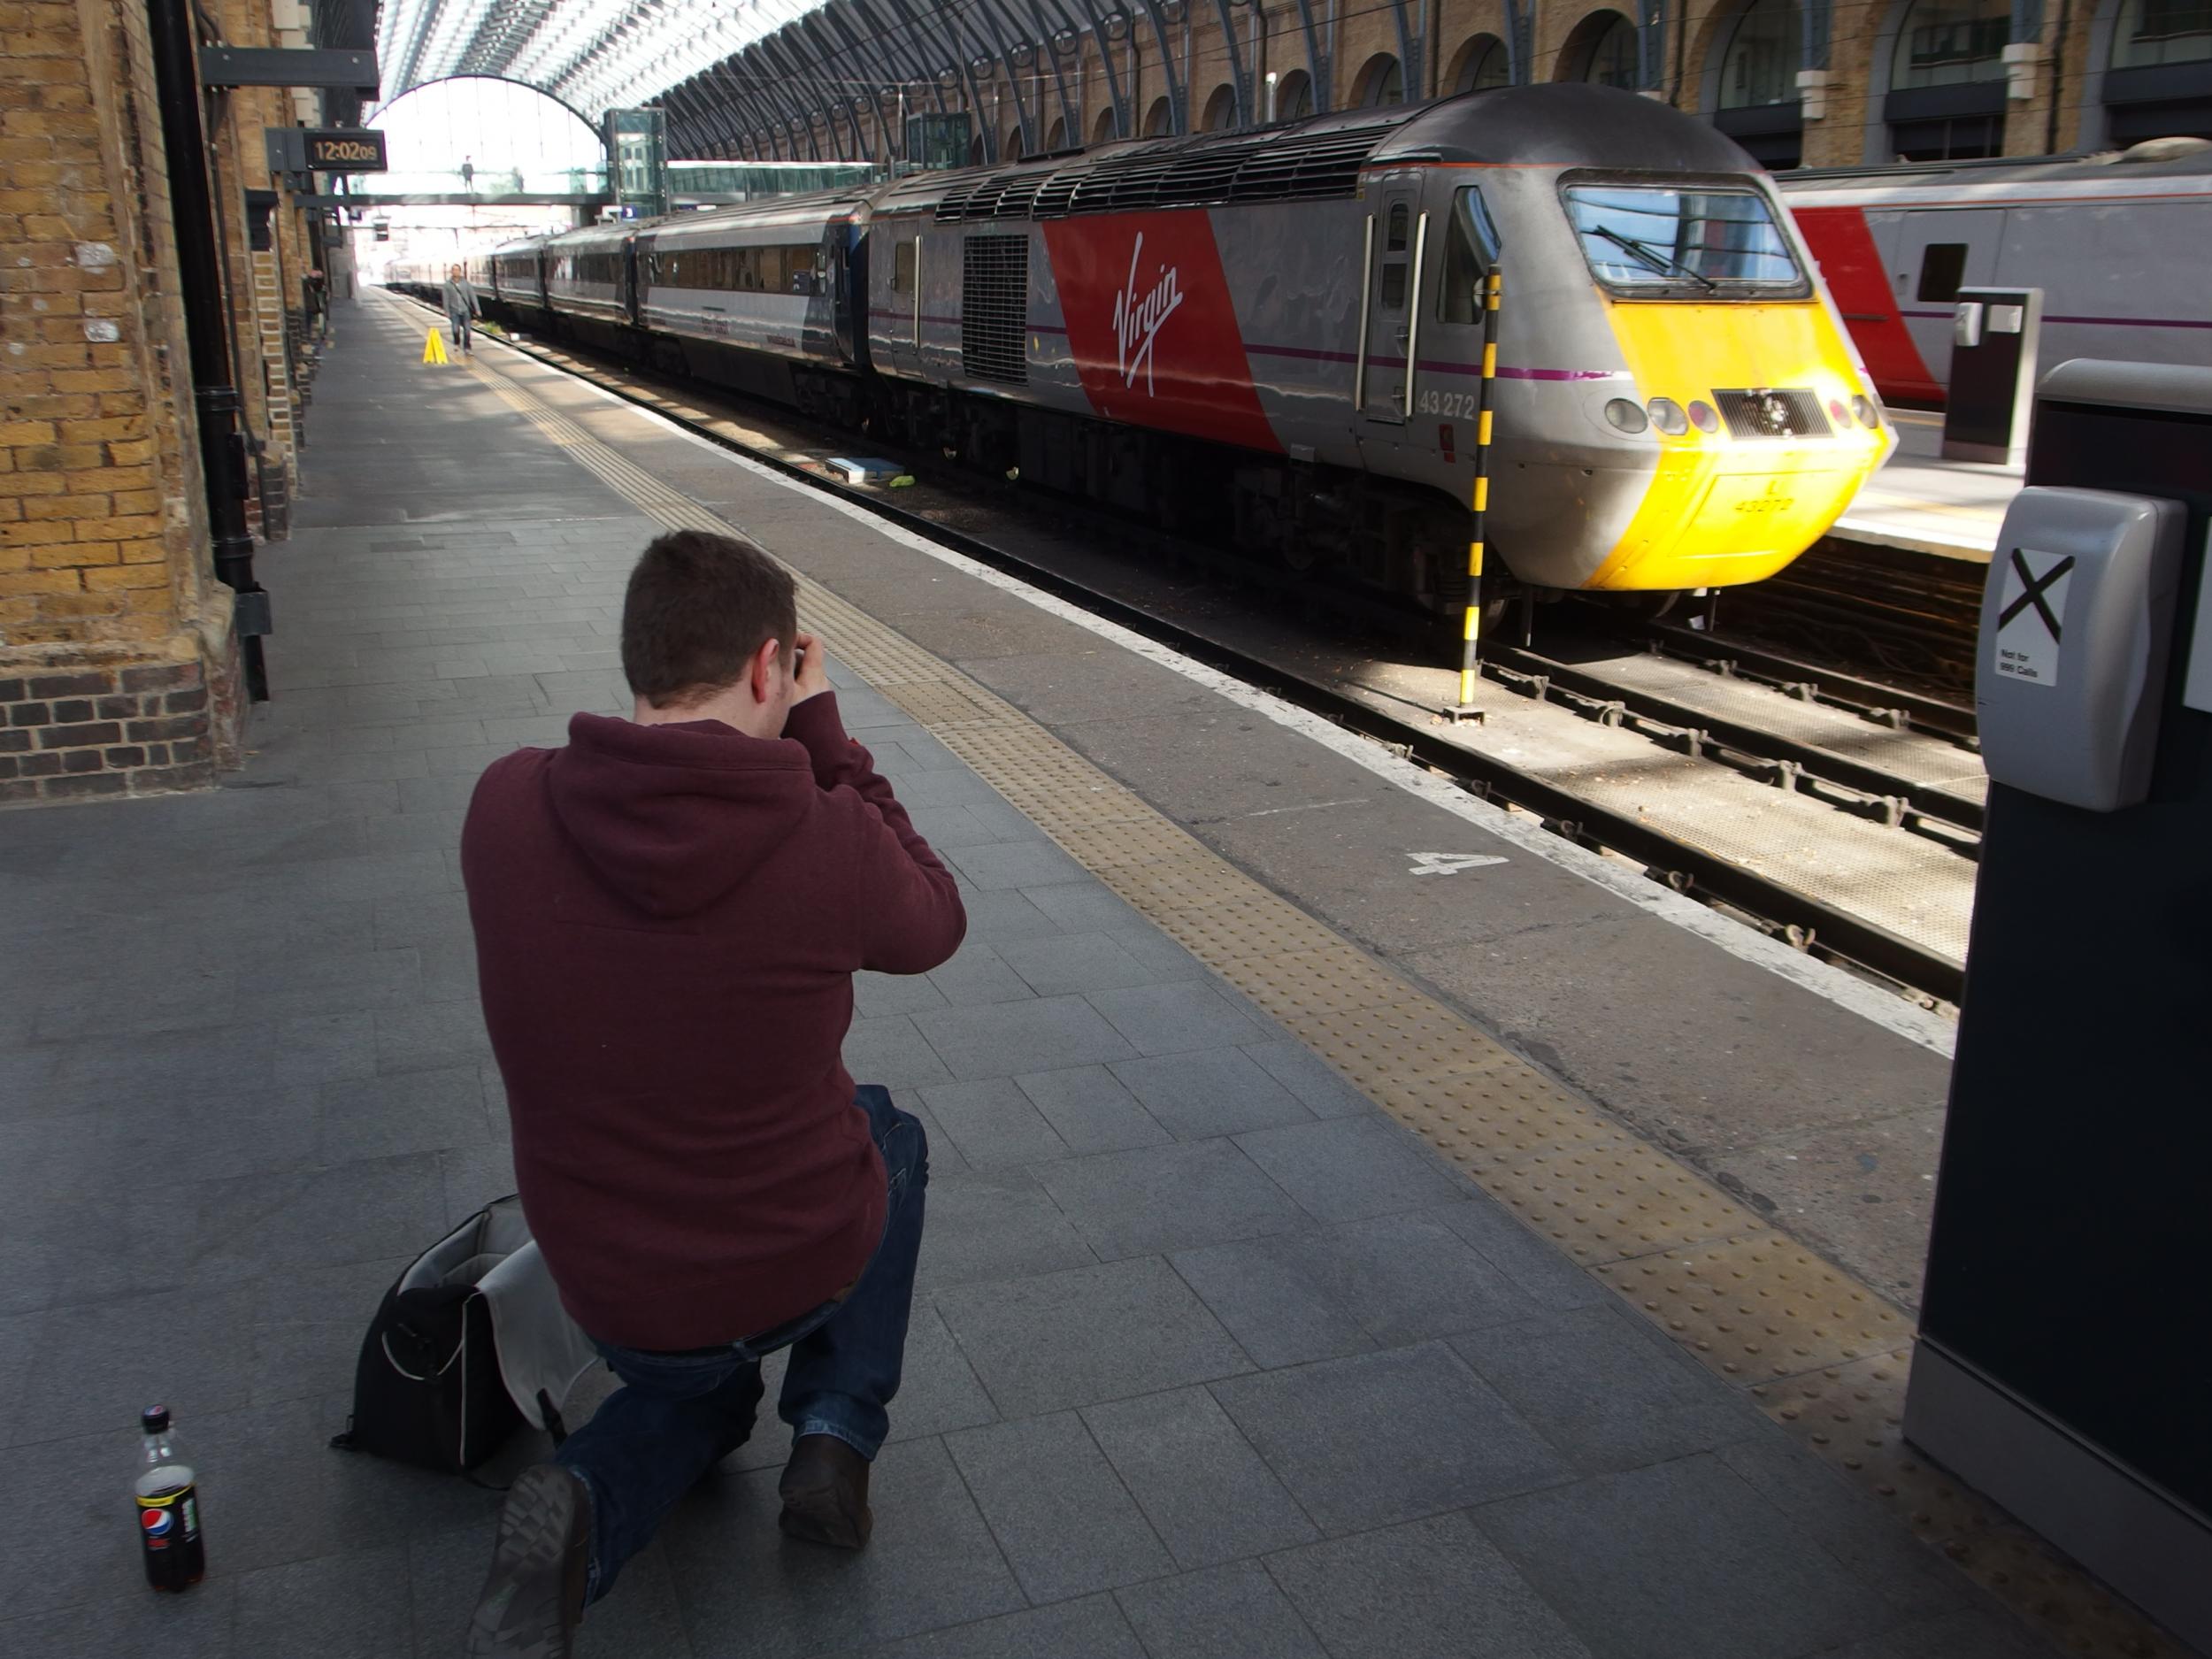 Happier days: The first Virgin Trains arrival at London King’s Cross in 2015